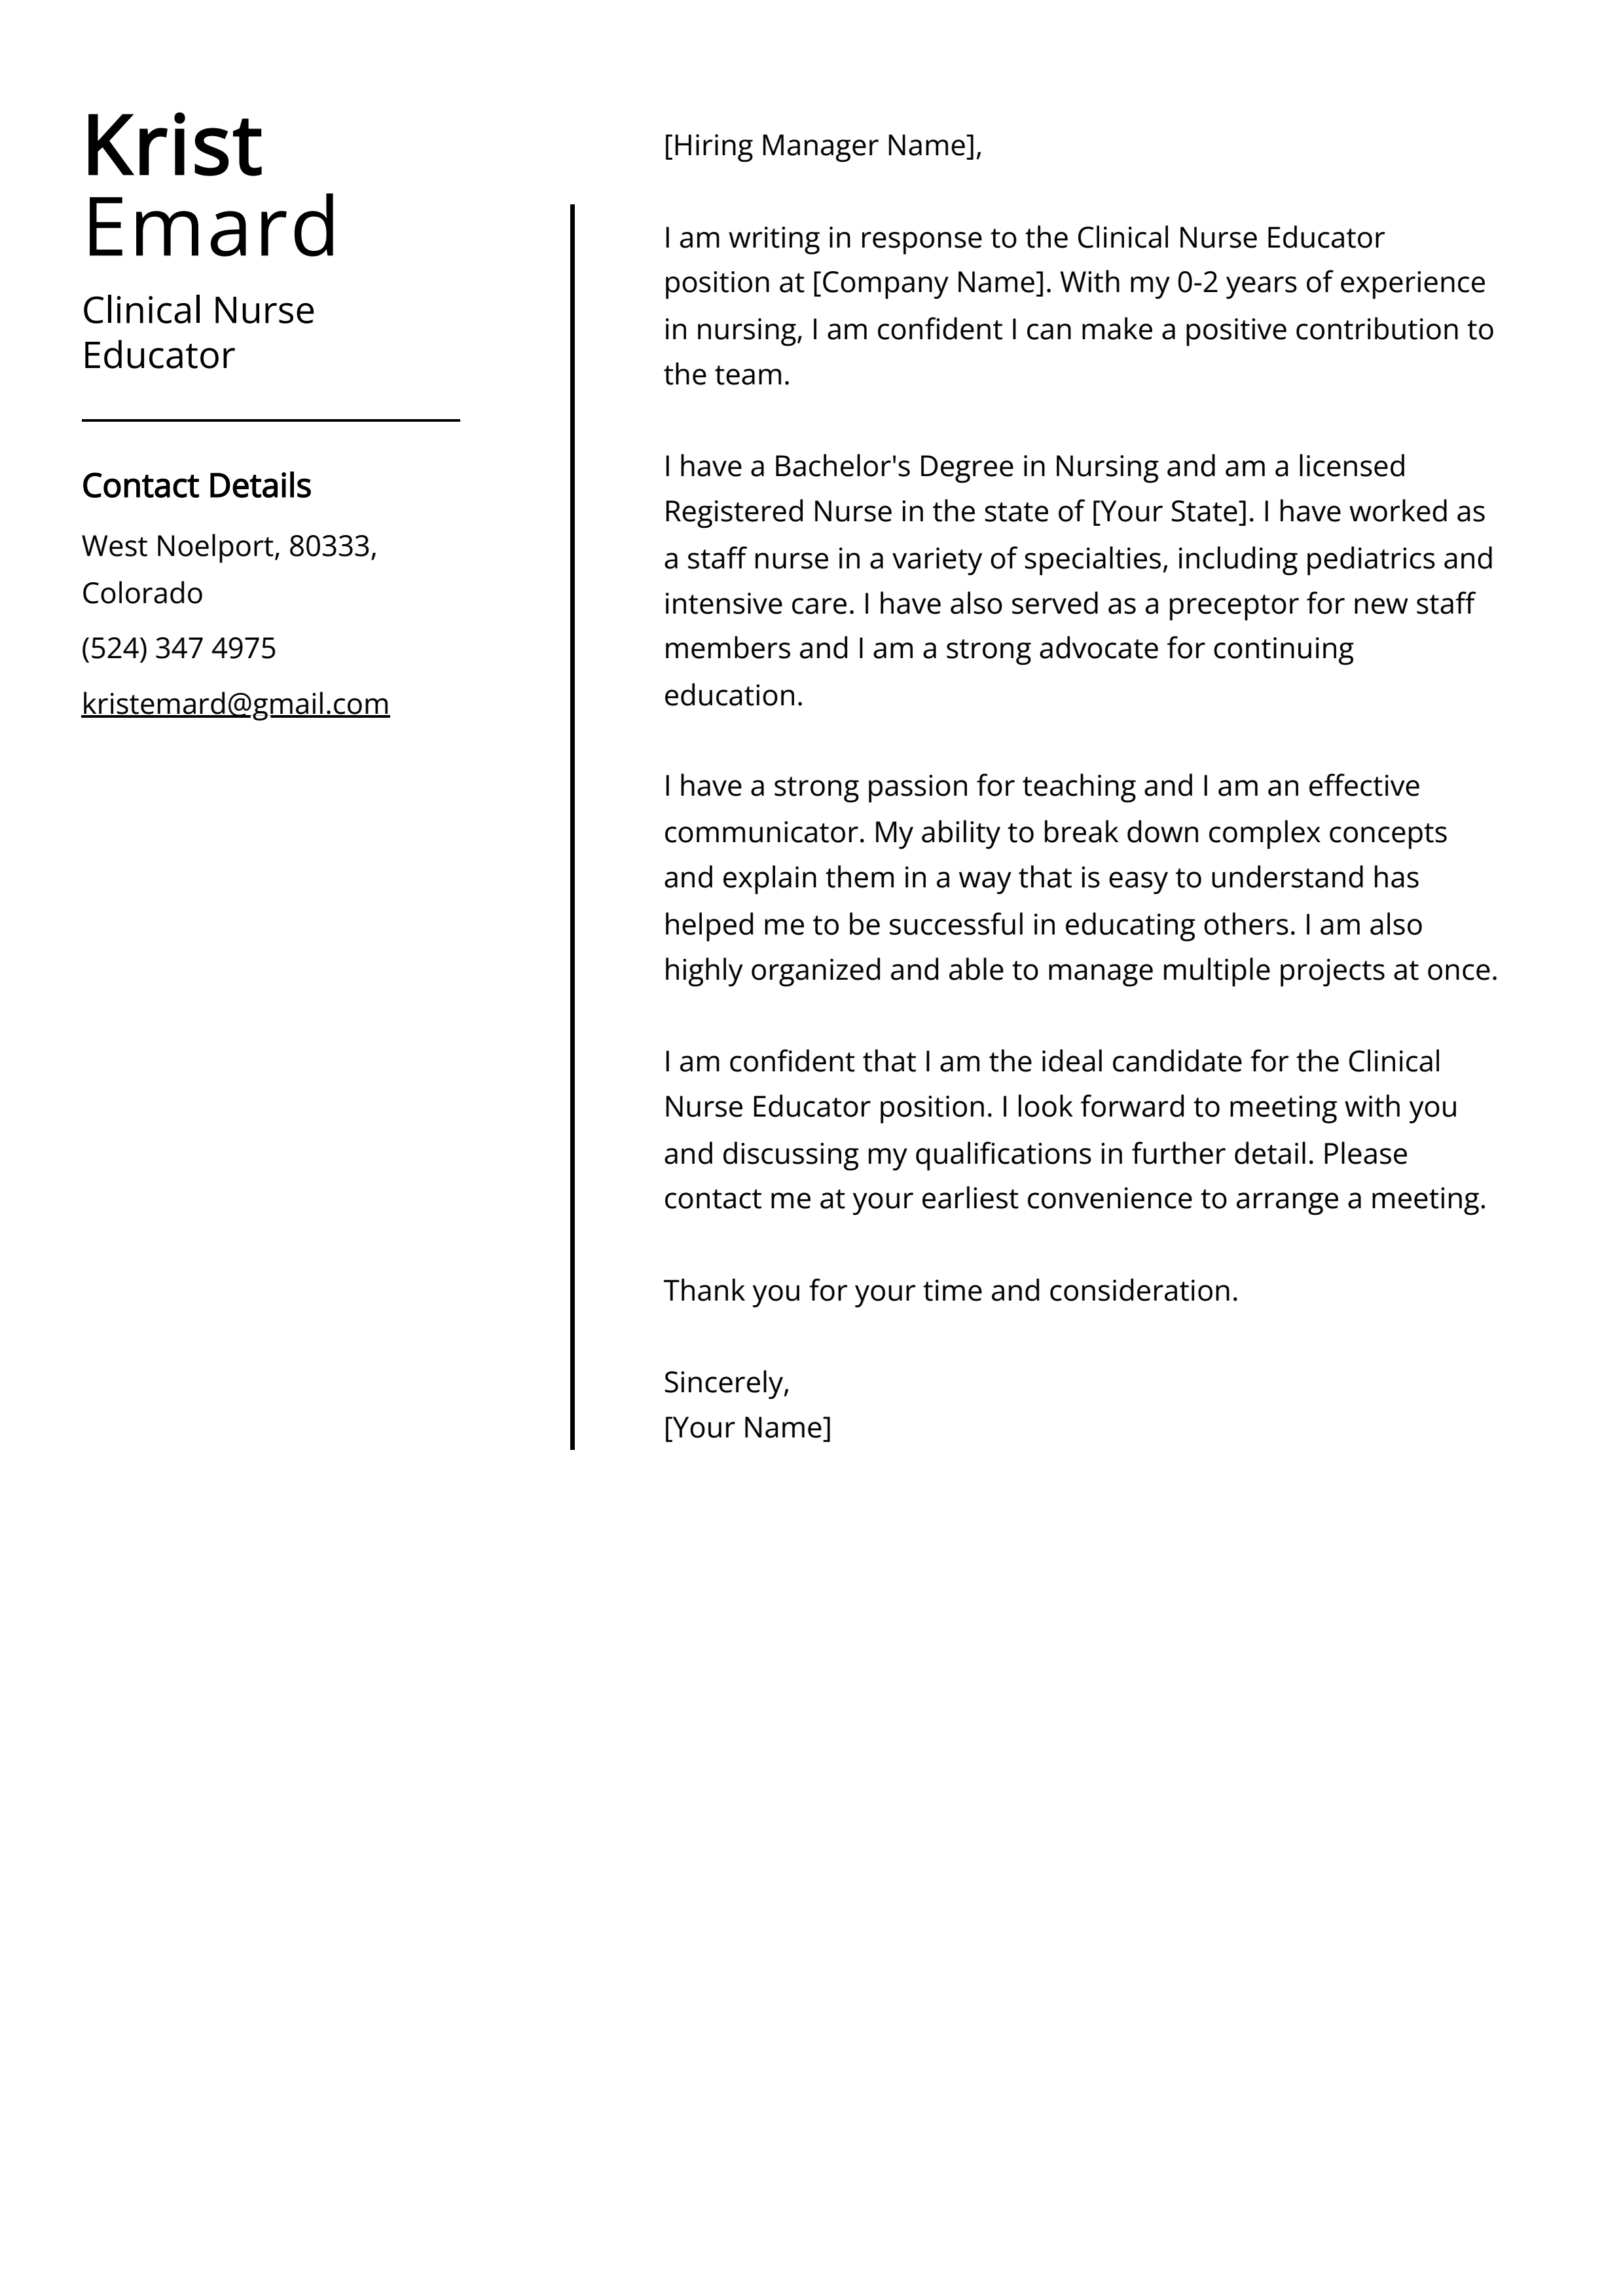 Clinical Nurse Educator Cover Letter Example (Free Guide)